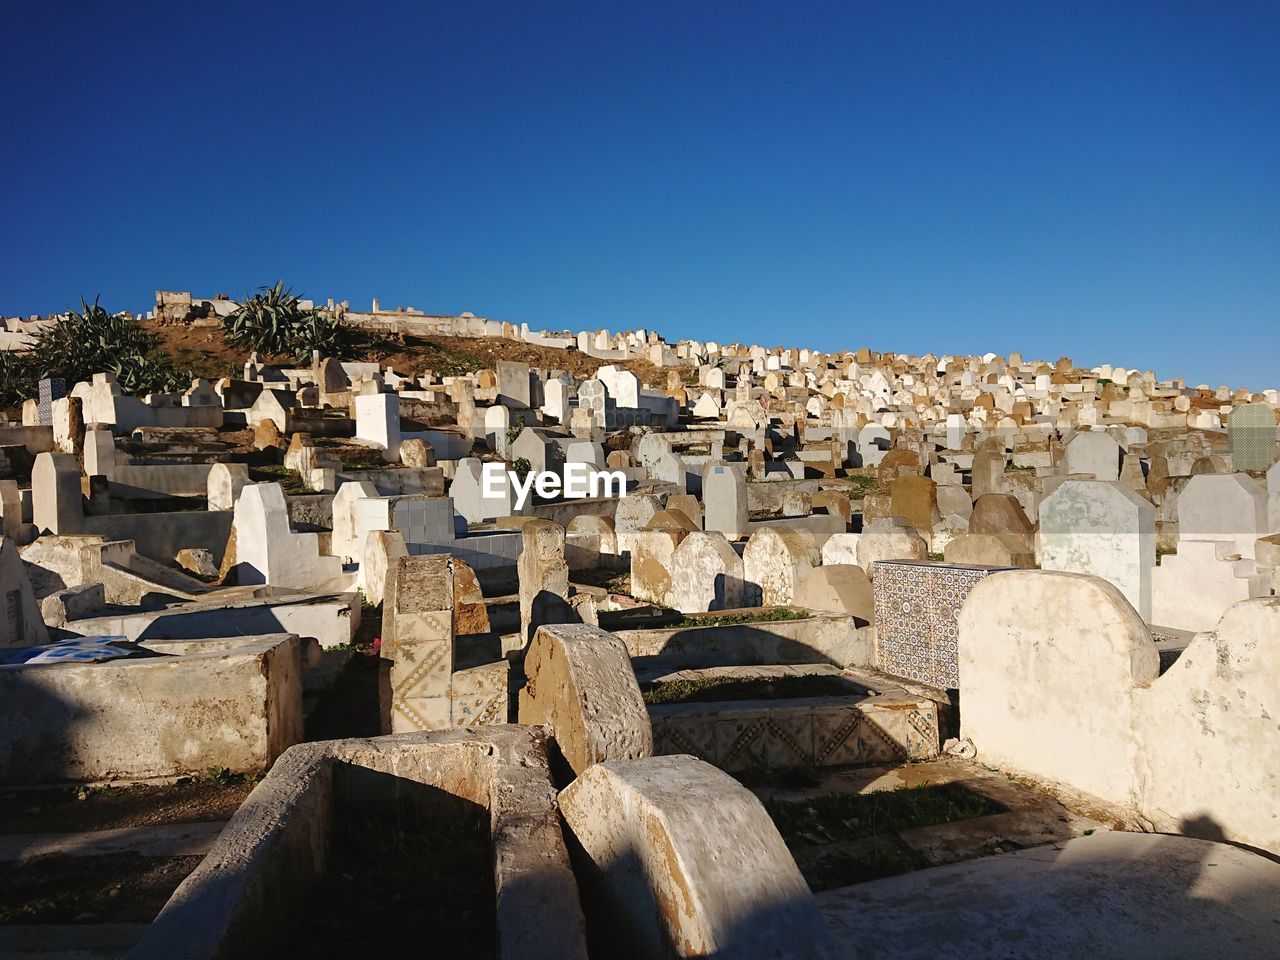 Cemetery in morocco